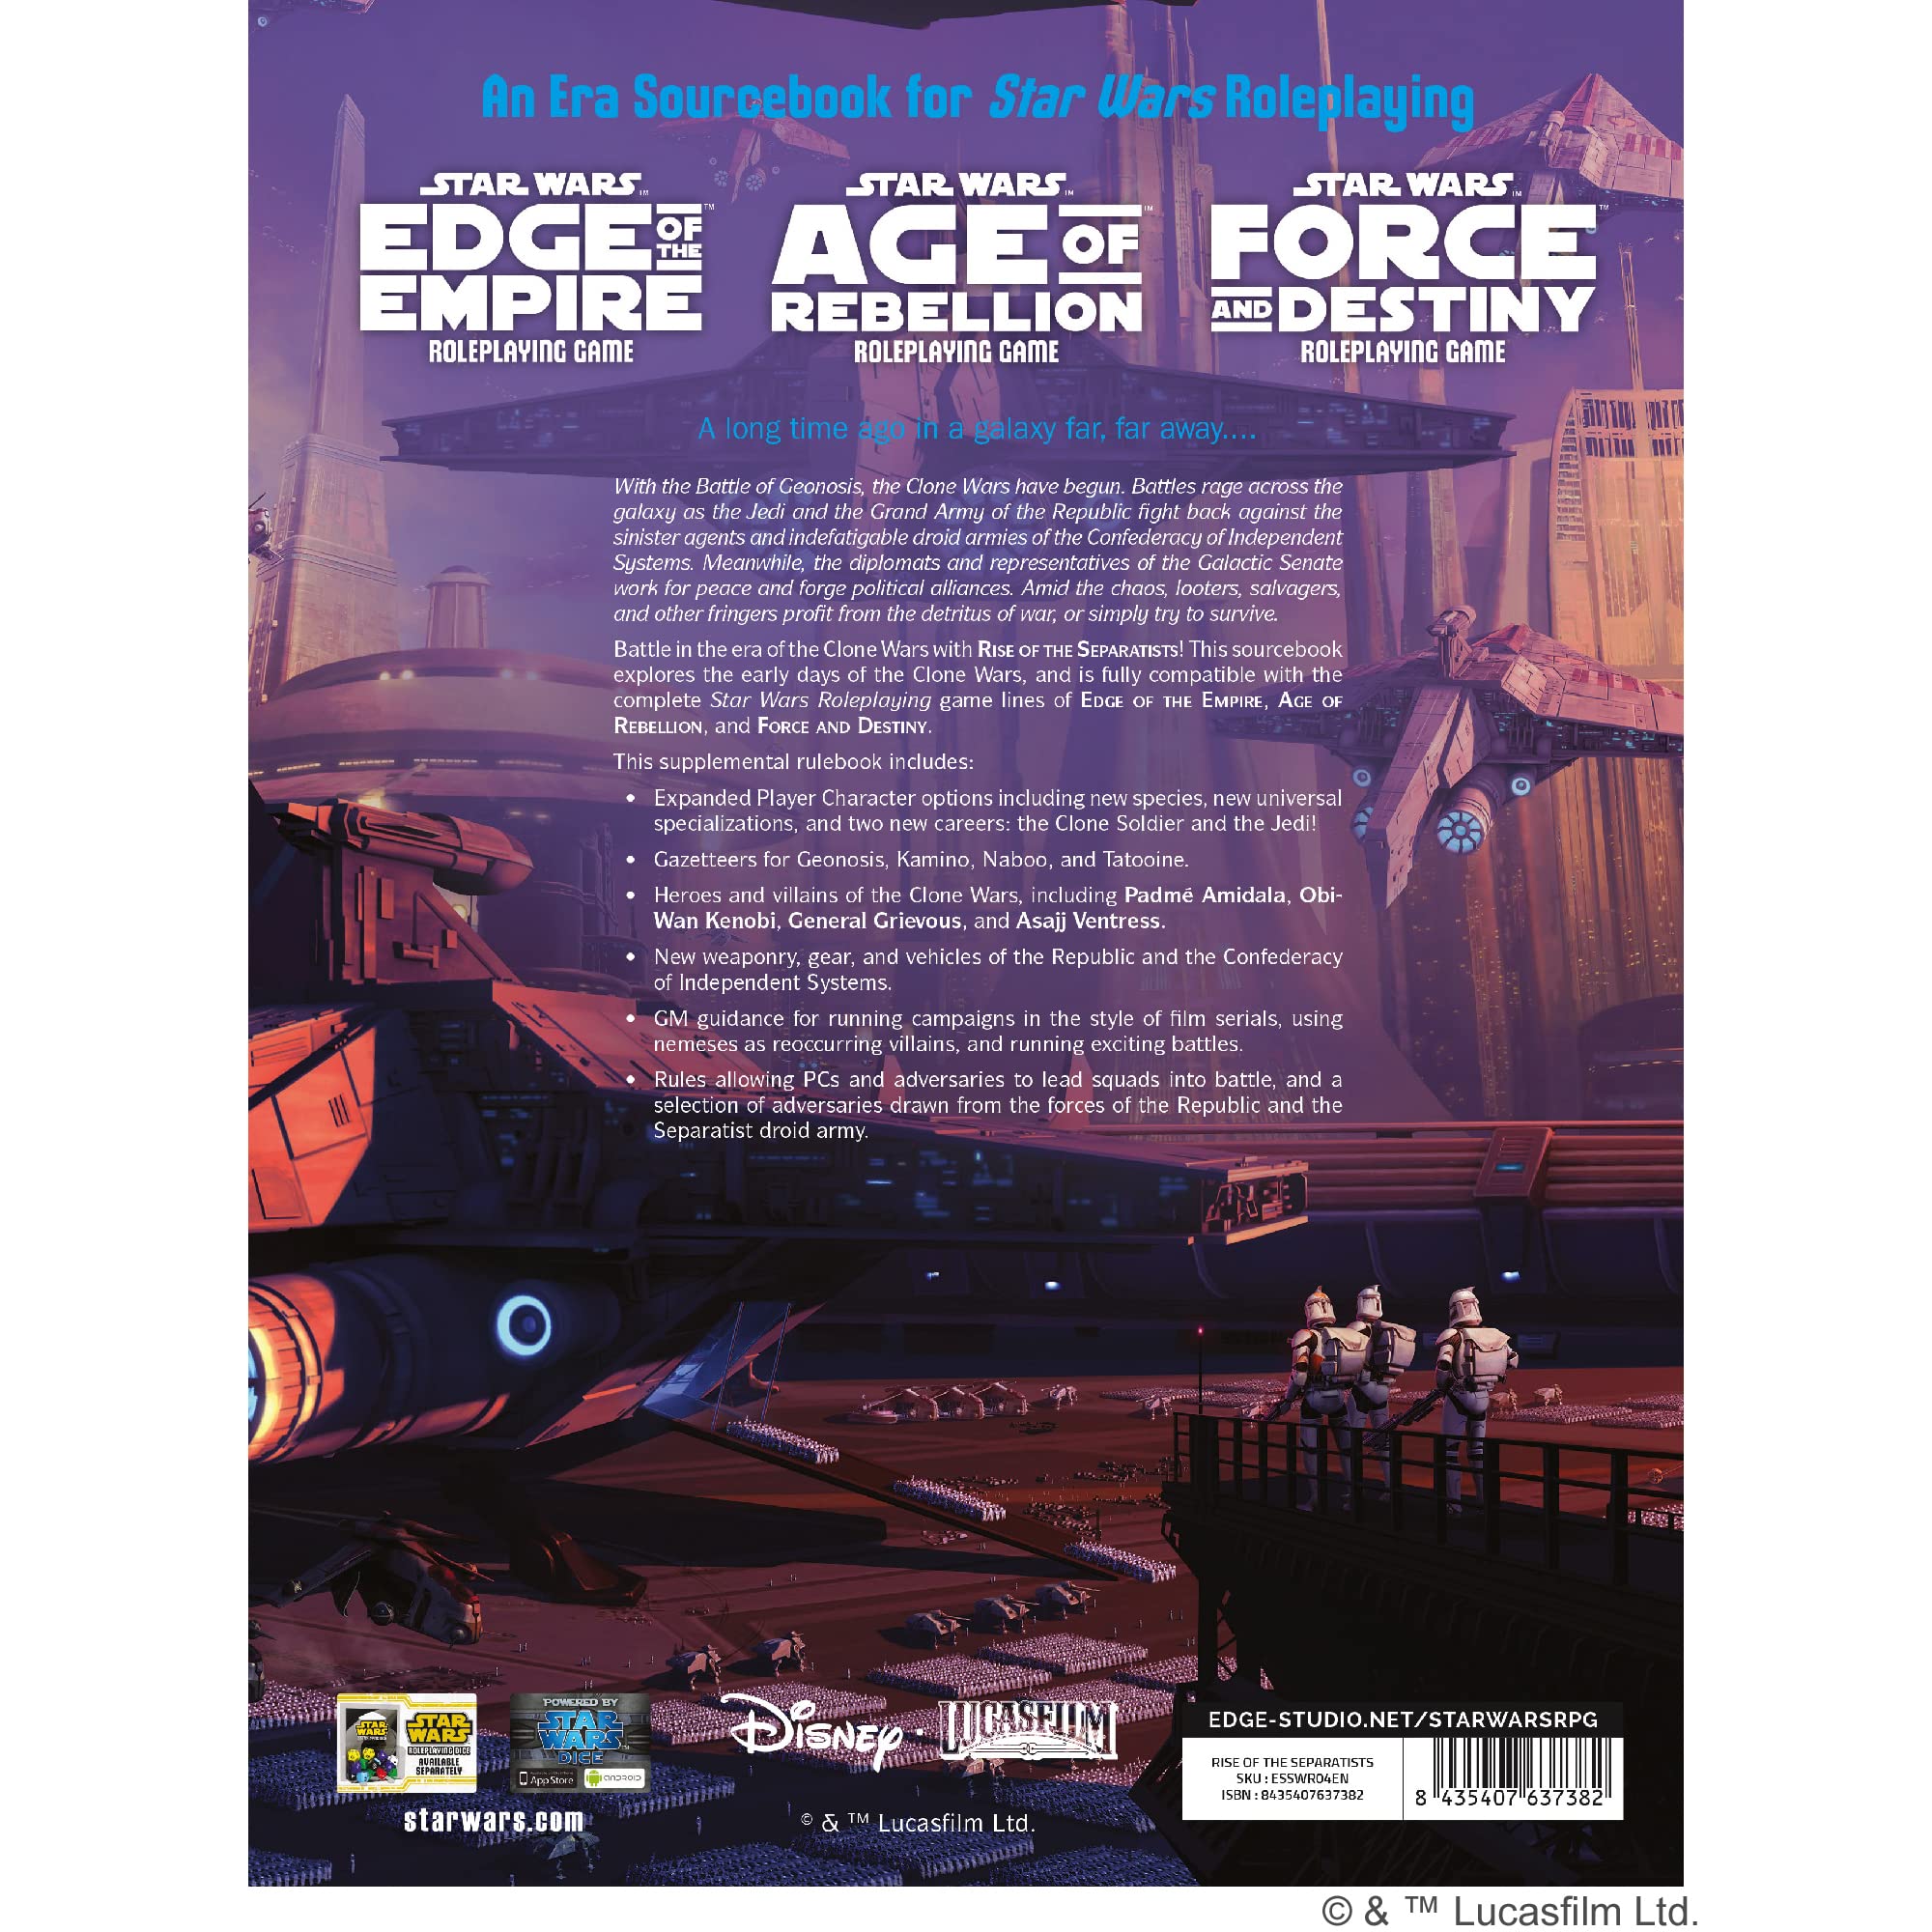 EDGE Studio Star Wars Rise of The Separatists Expansion Roleplaying Game Strategy Game Adventure Game for Adults and Kids Ages 10+ 2-8 Players Average Playtime 1 Hour Made